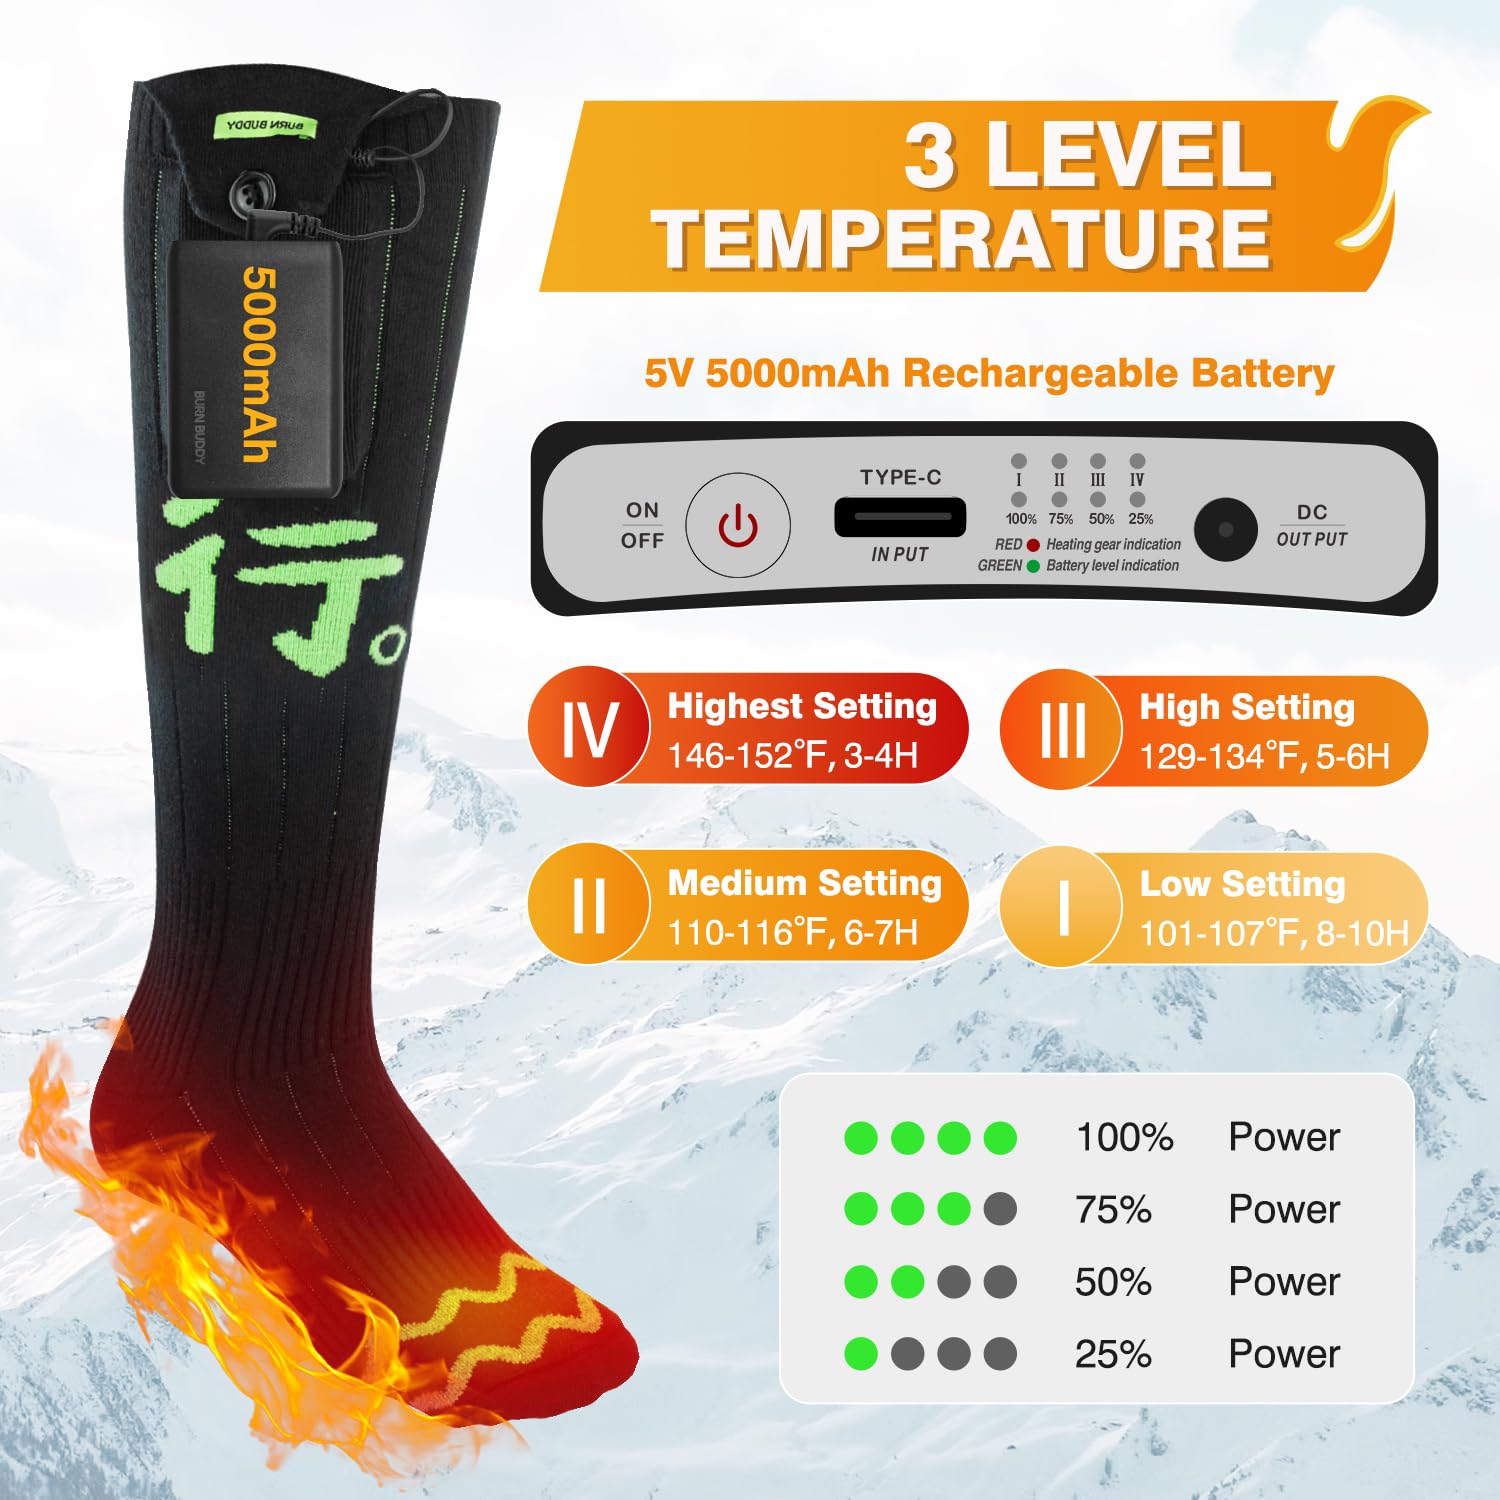 Heated Socks, Electric Socks with App Control, 5000mAh Rechargeable Heated Socks for Men, Washable Heated Socks Women, Foot Warmer for Winter Camping Hunting Outdoors Heating Socks Warm Socks -XL